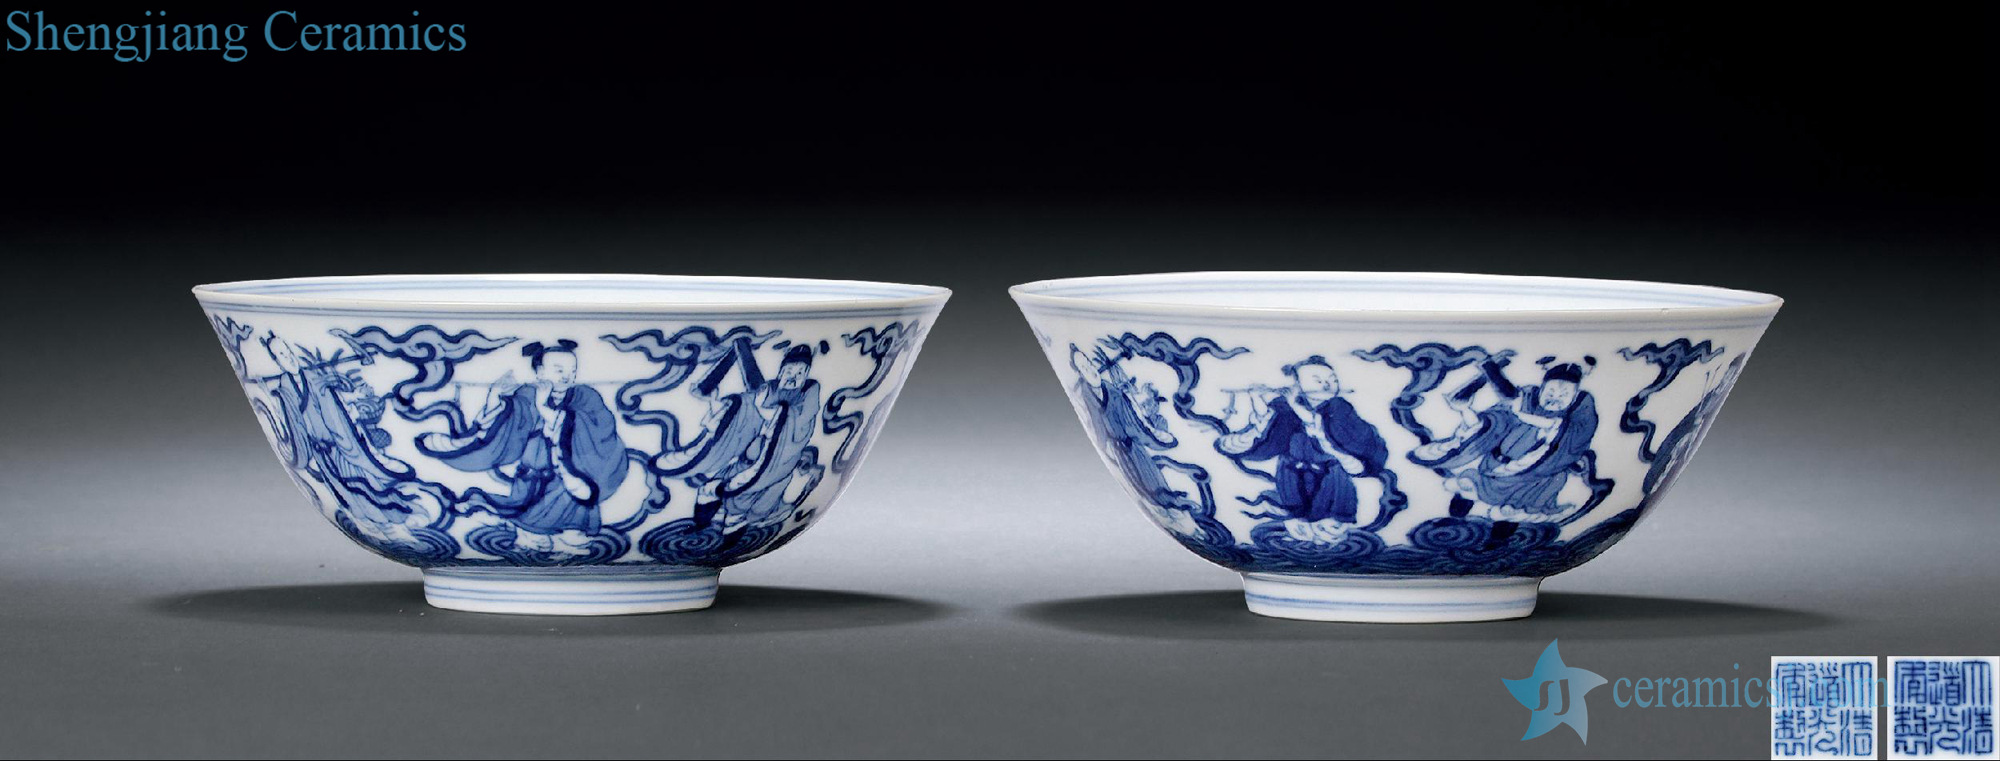 Qing daoguang Blue and white bowl of the eight immortals characters (a)